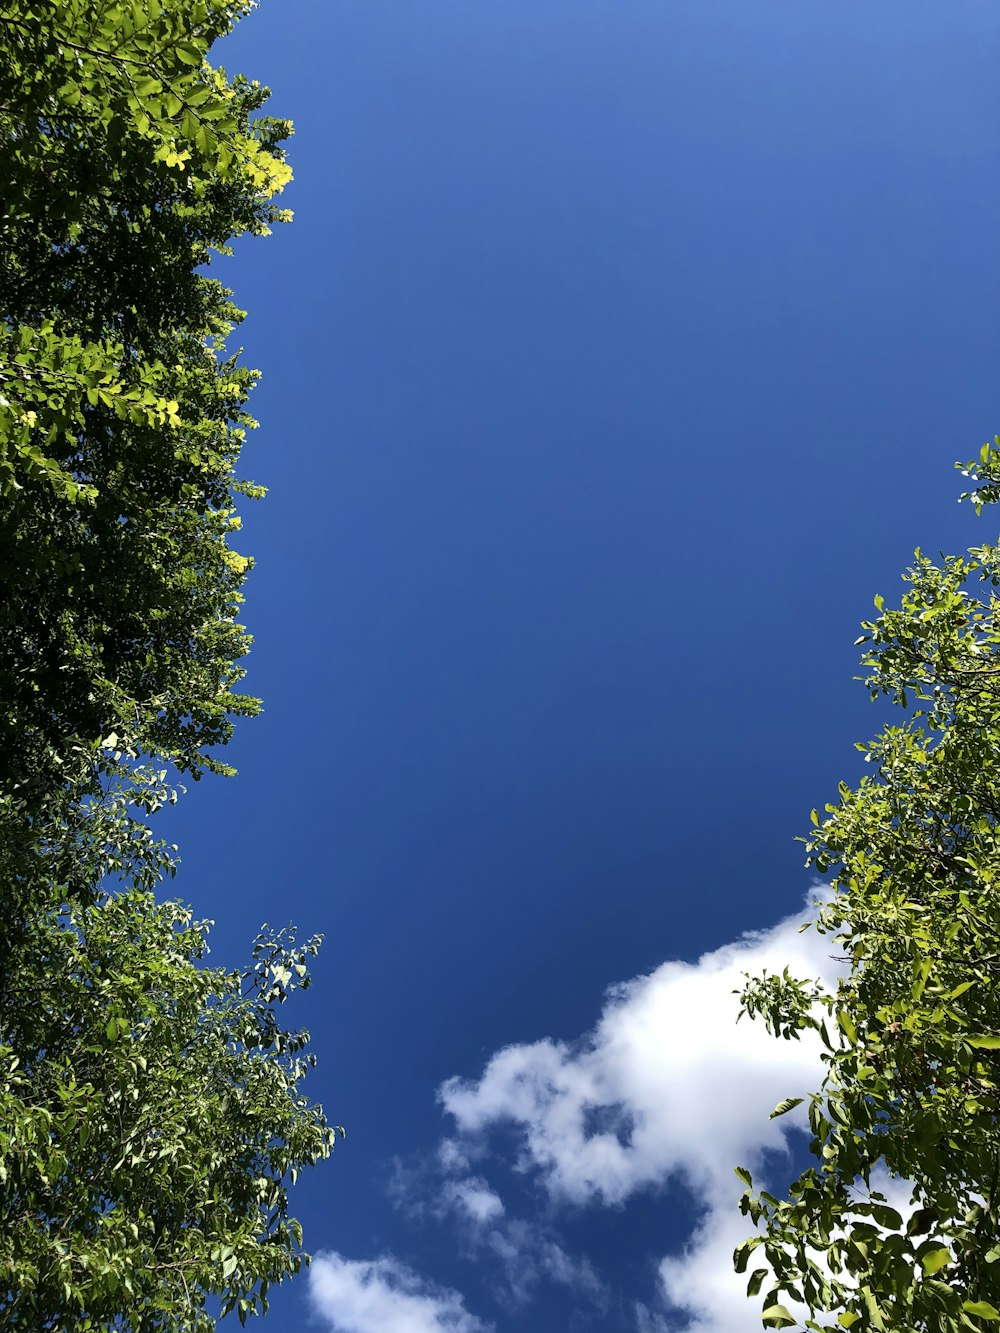 a blue sky with some clouds and some trees